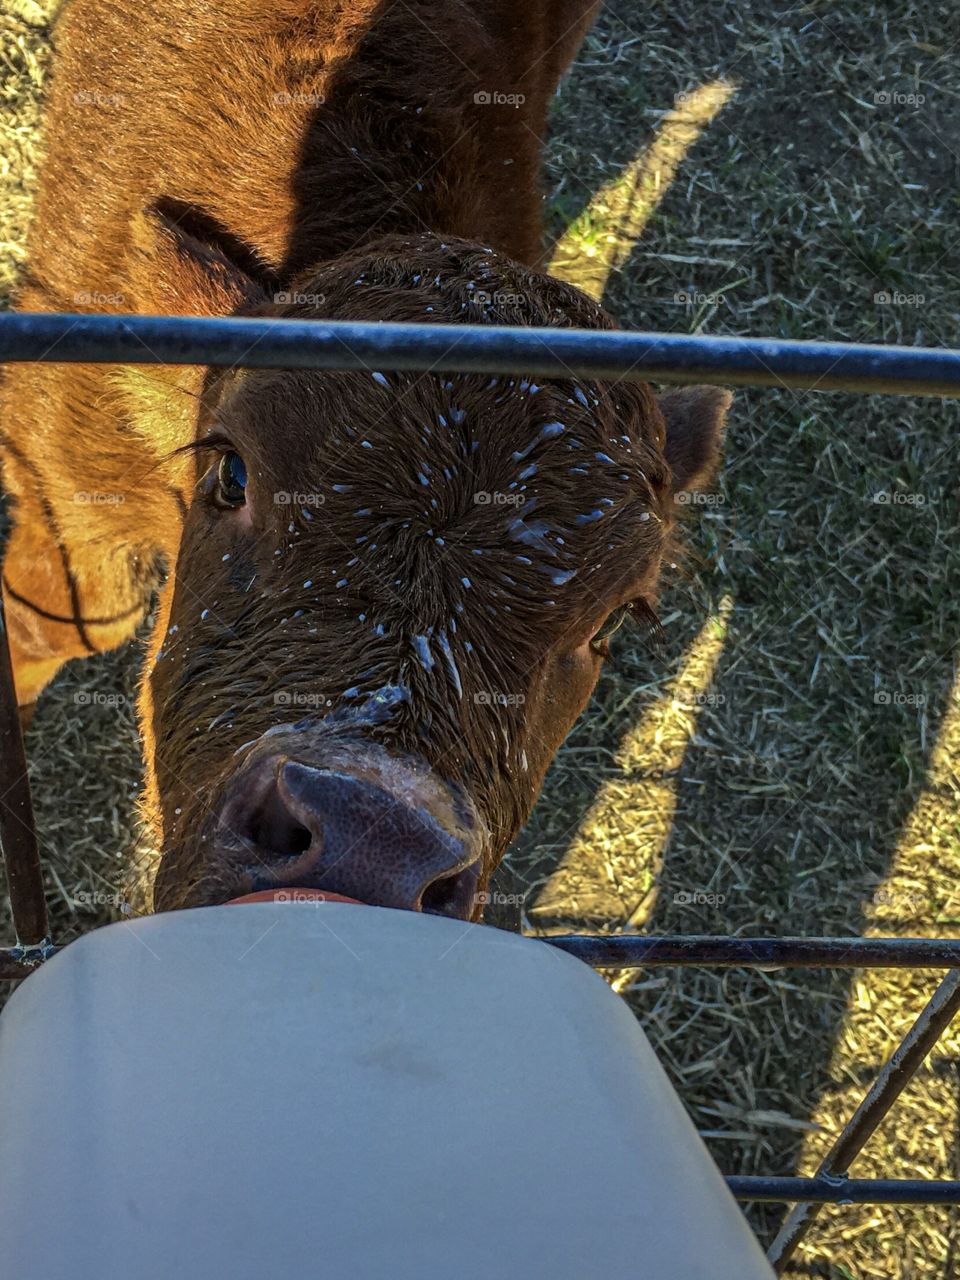 Little calf got the milk everywhere but in his mouth, the cutest thing I have seen in a long time.